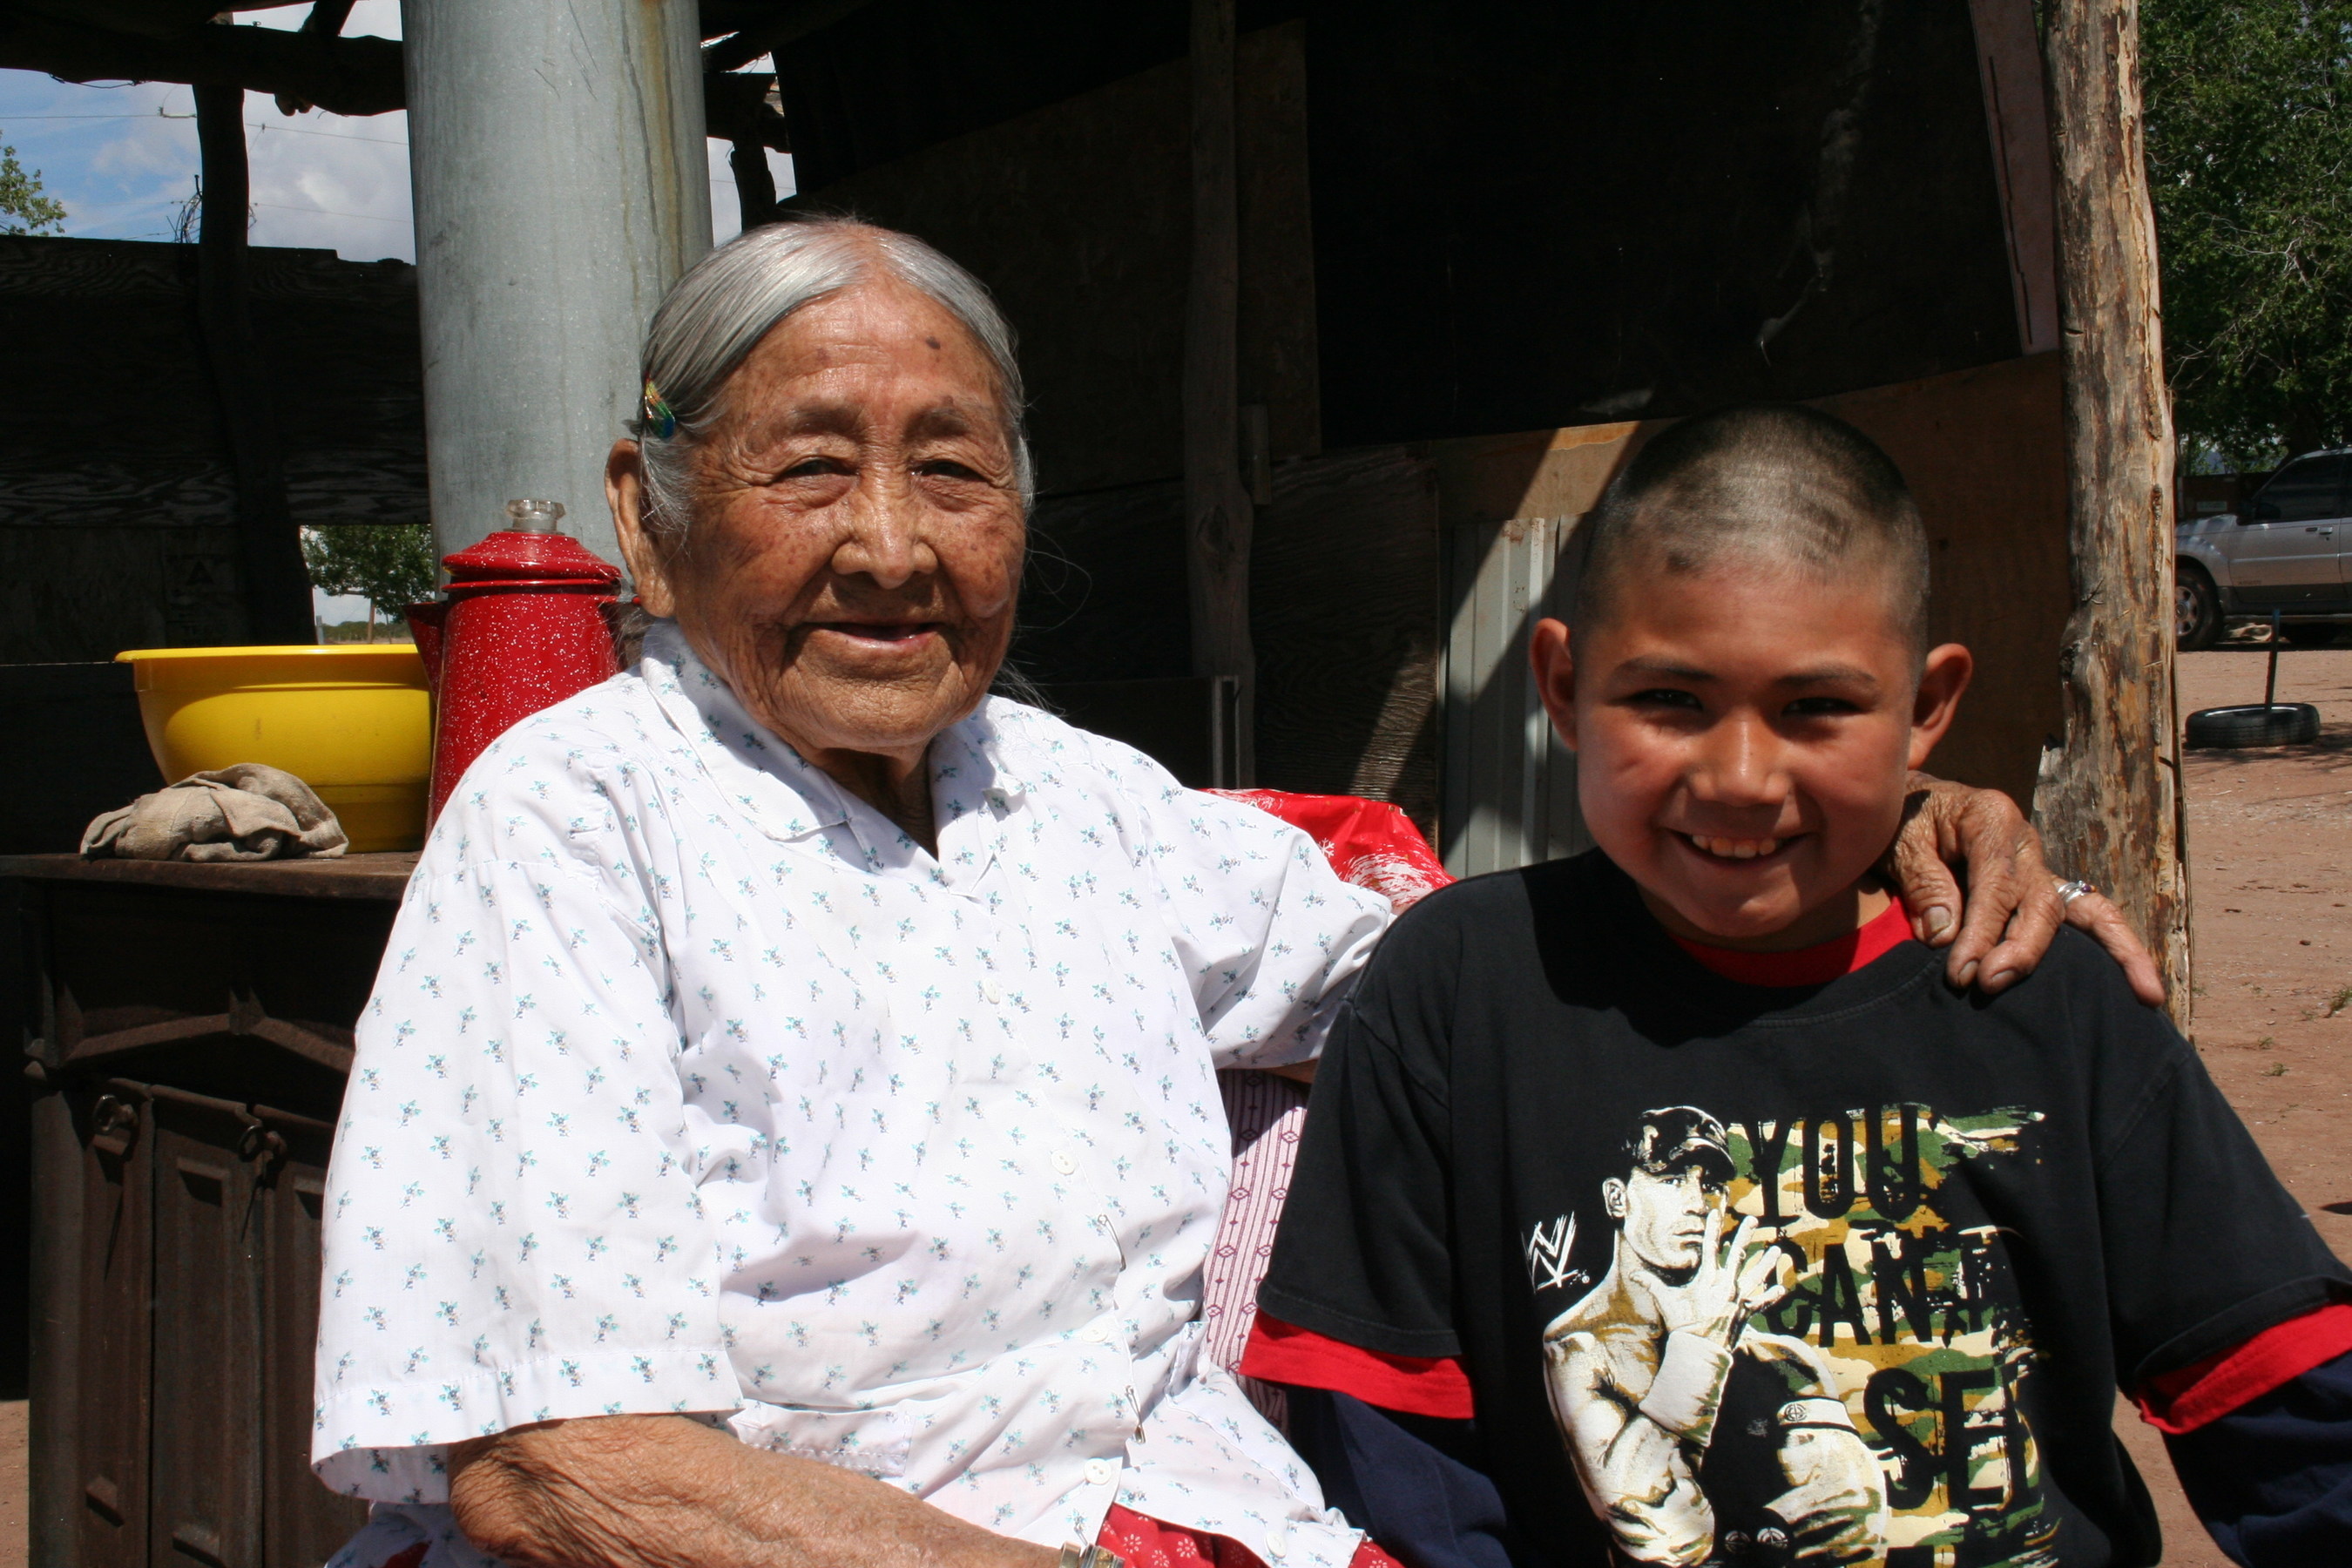 Native youth and grandmother from the Navajo Nation